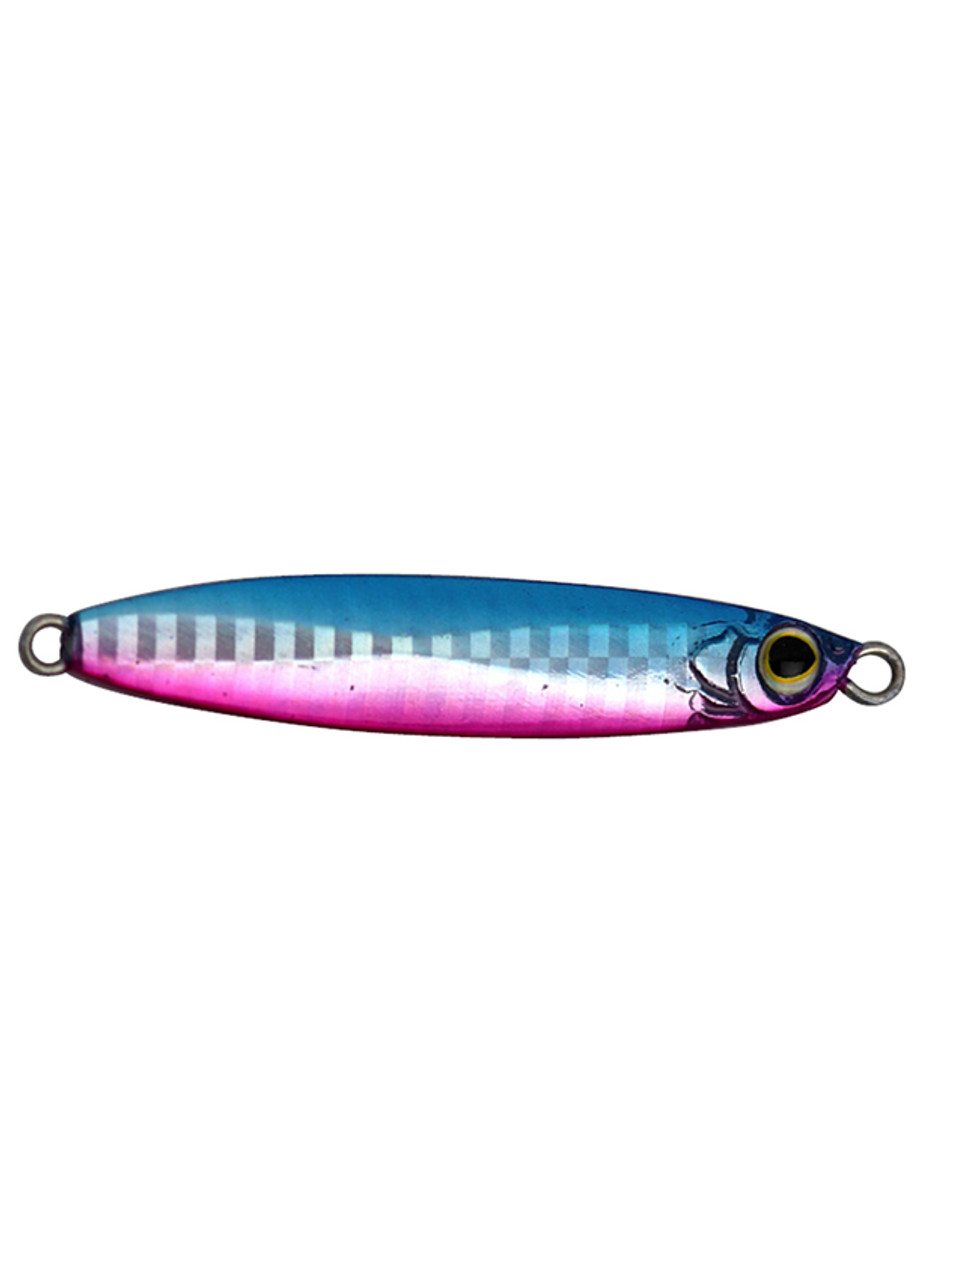 https://cdn11.bigcommerce.com/s-juamt7rae6/images/stencil/1280x1280/products/3937/9136/Shimano-ColtSniper-PinkBlue__02846.1653420278.jpg?c=1?imbypass=on